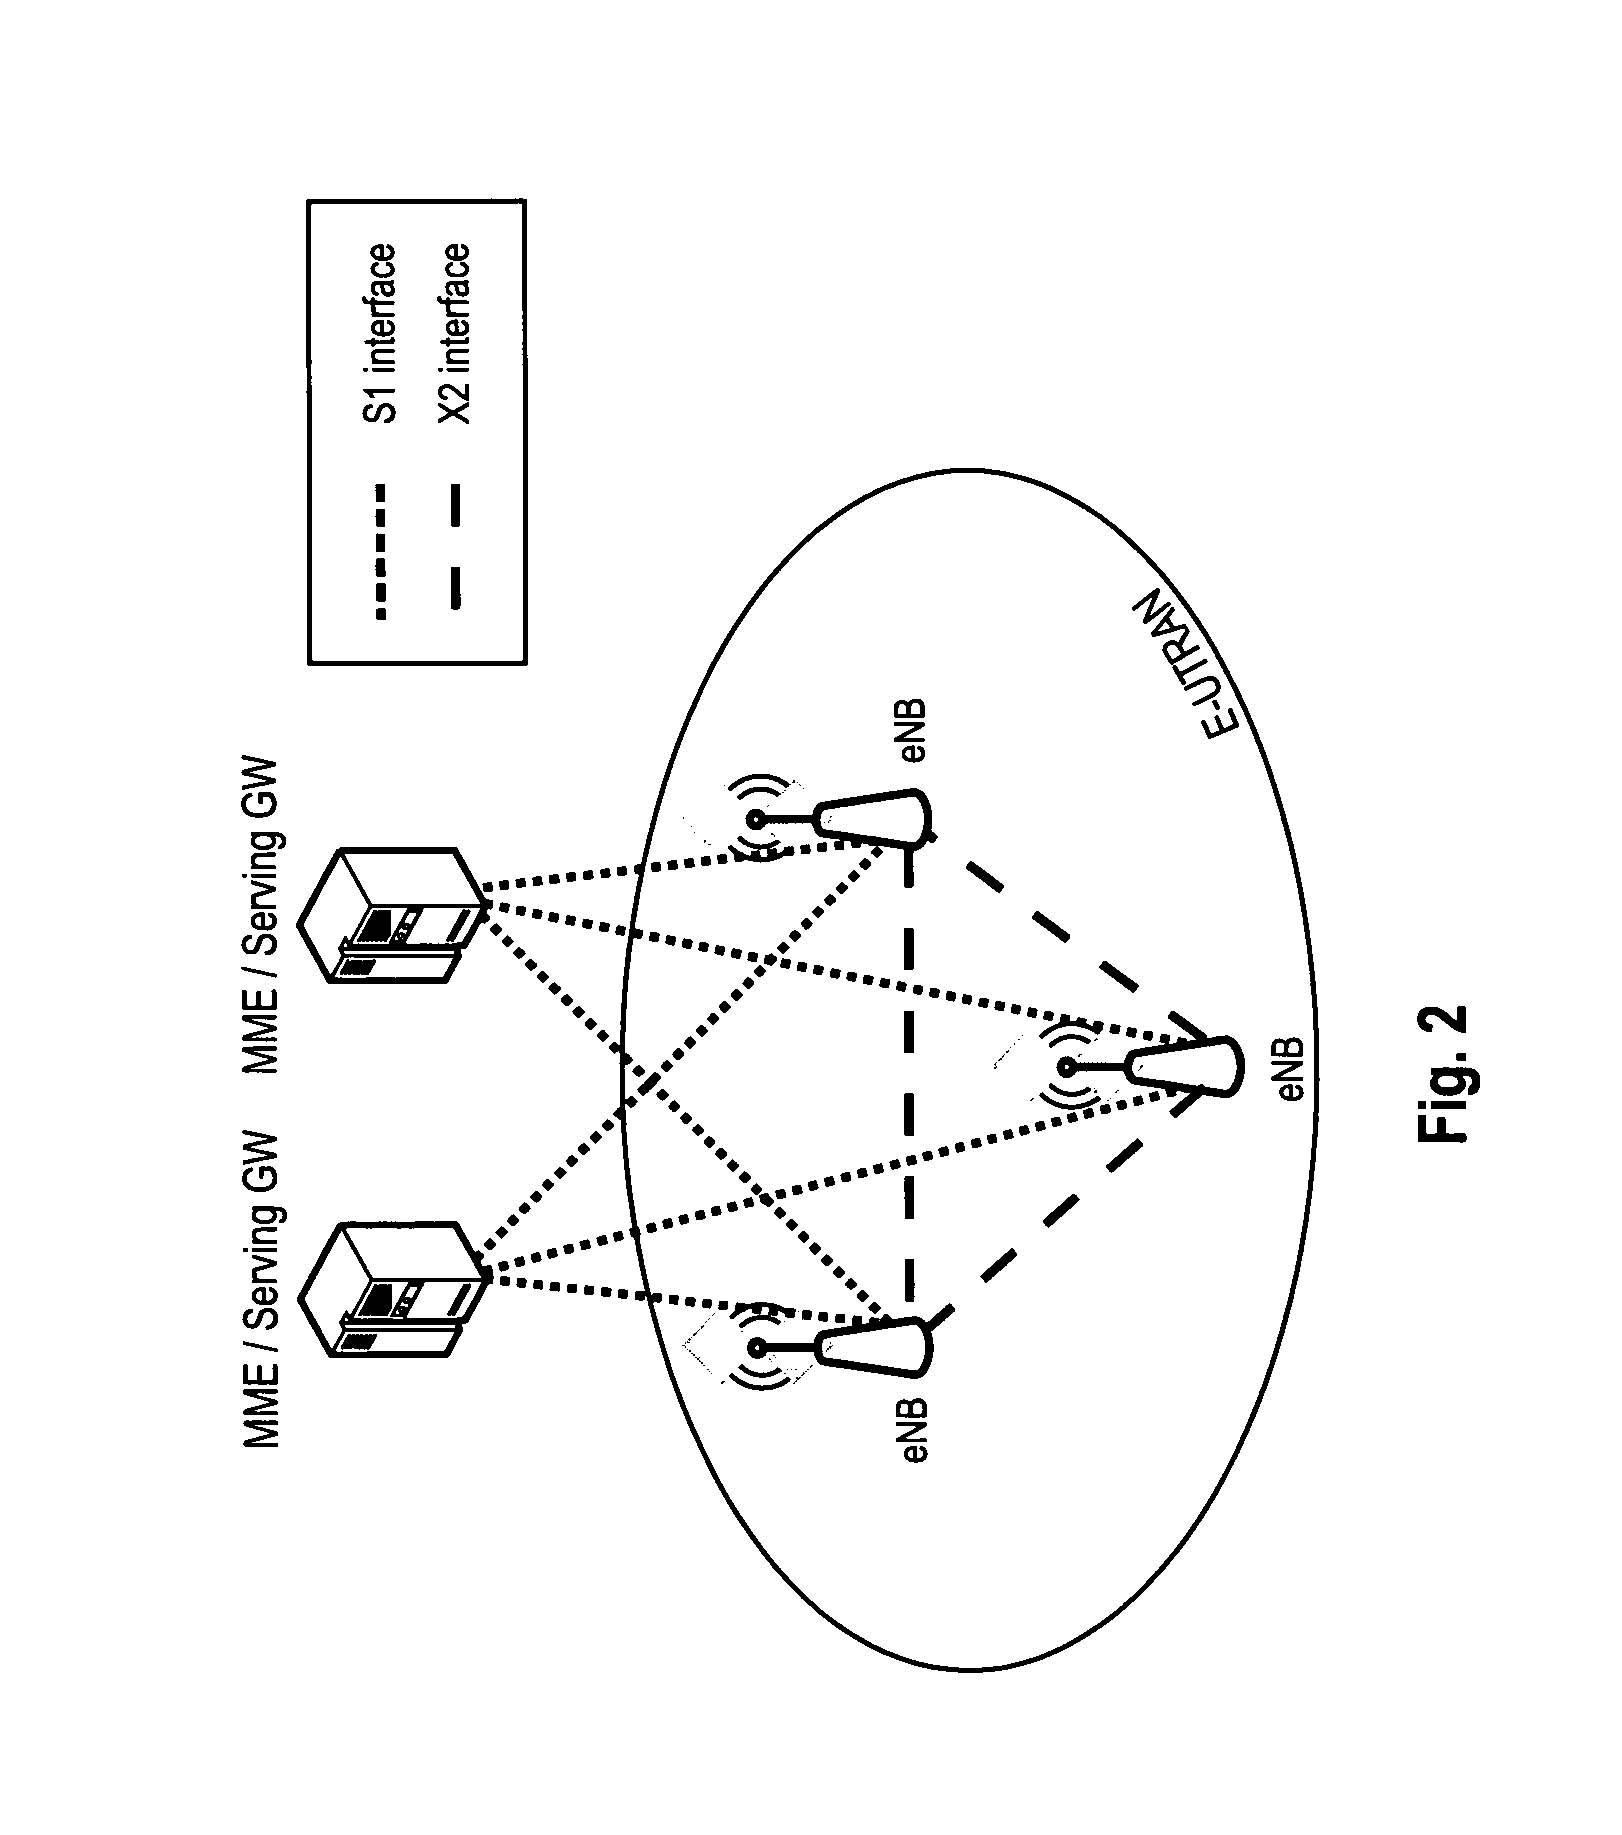 Transmit power control signaling for commuinication systems using carrier aggregation